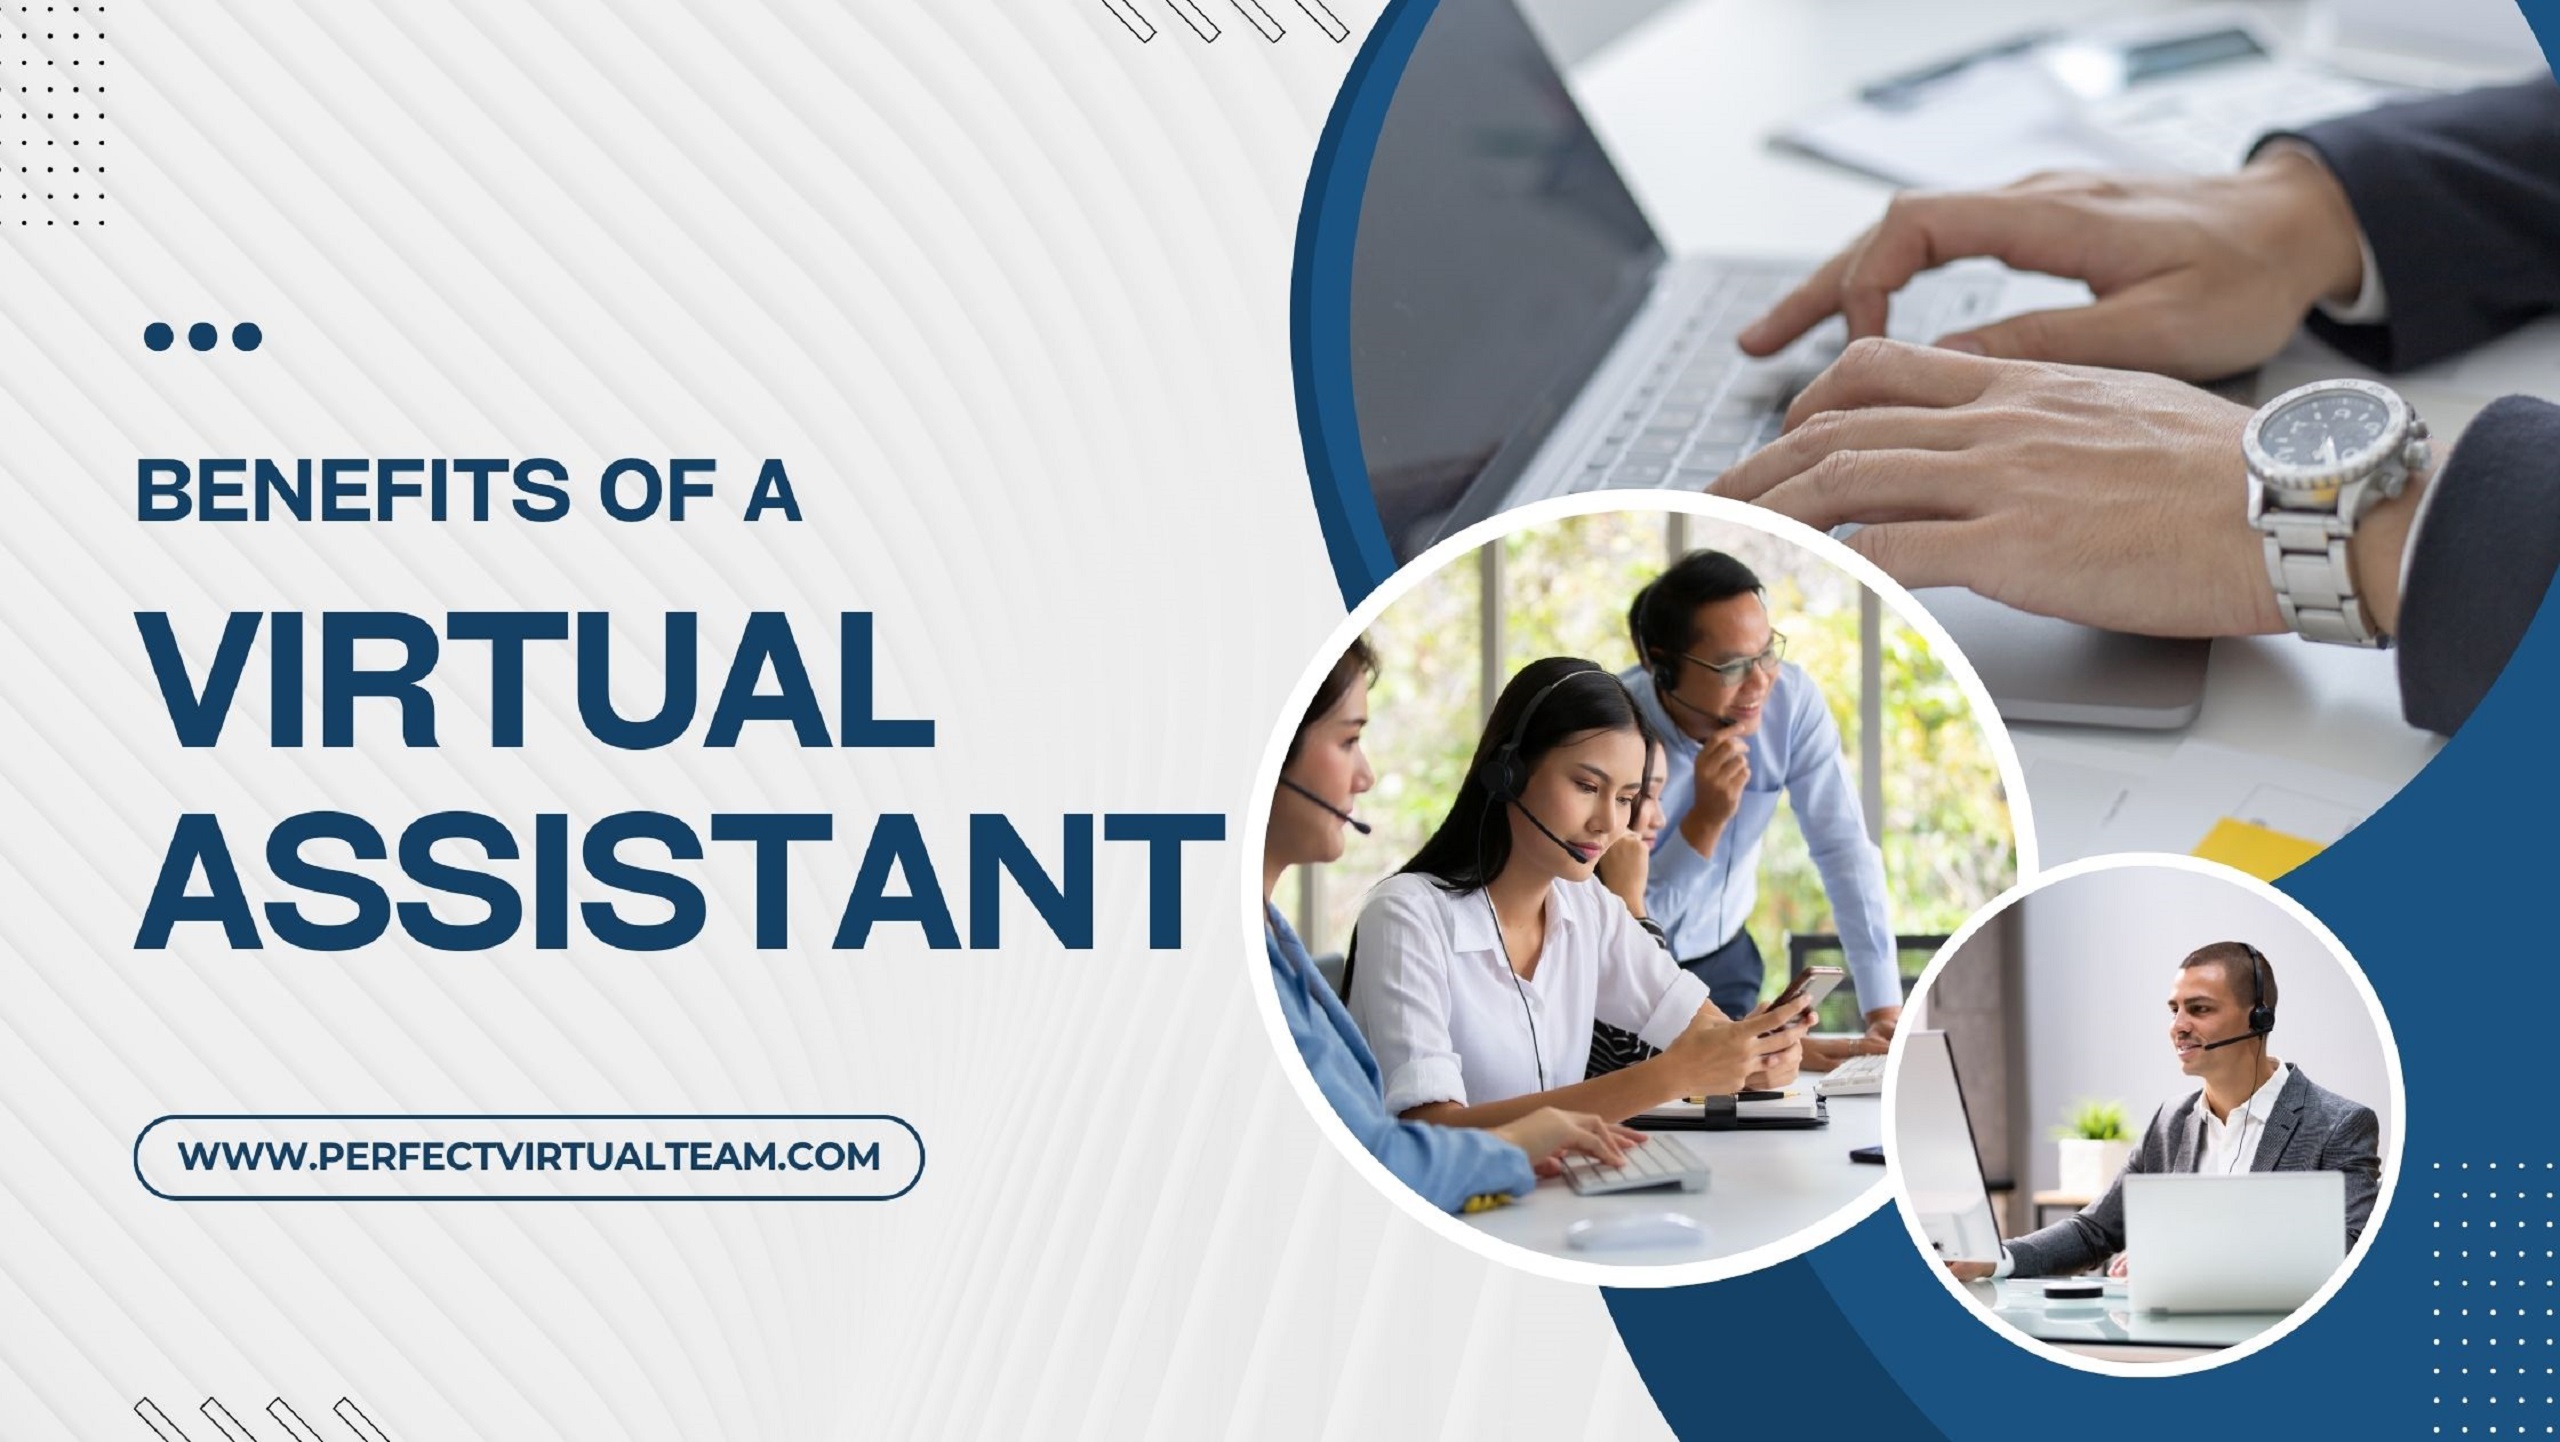 Benefits of a Virtual Assistant
